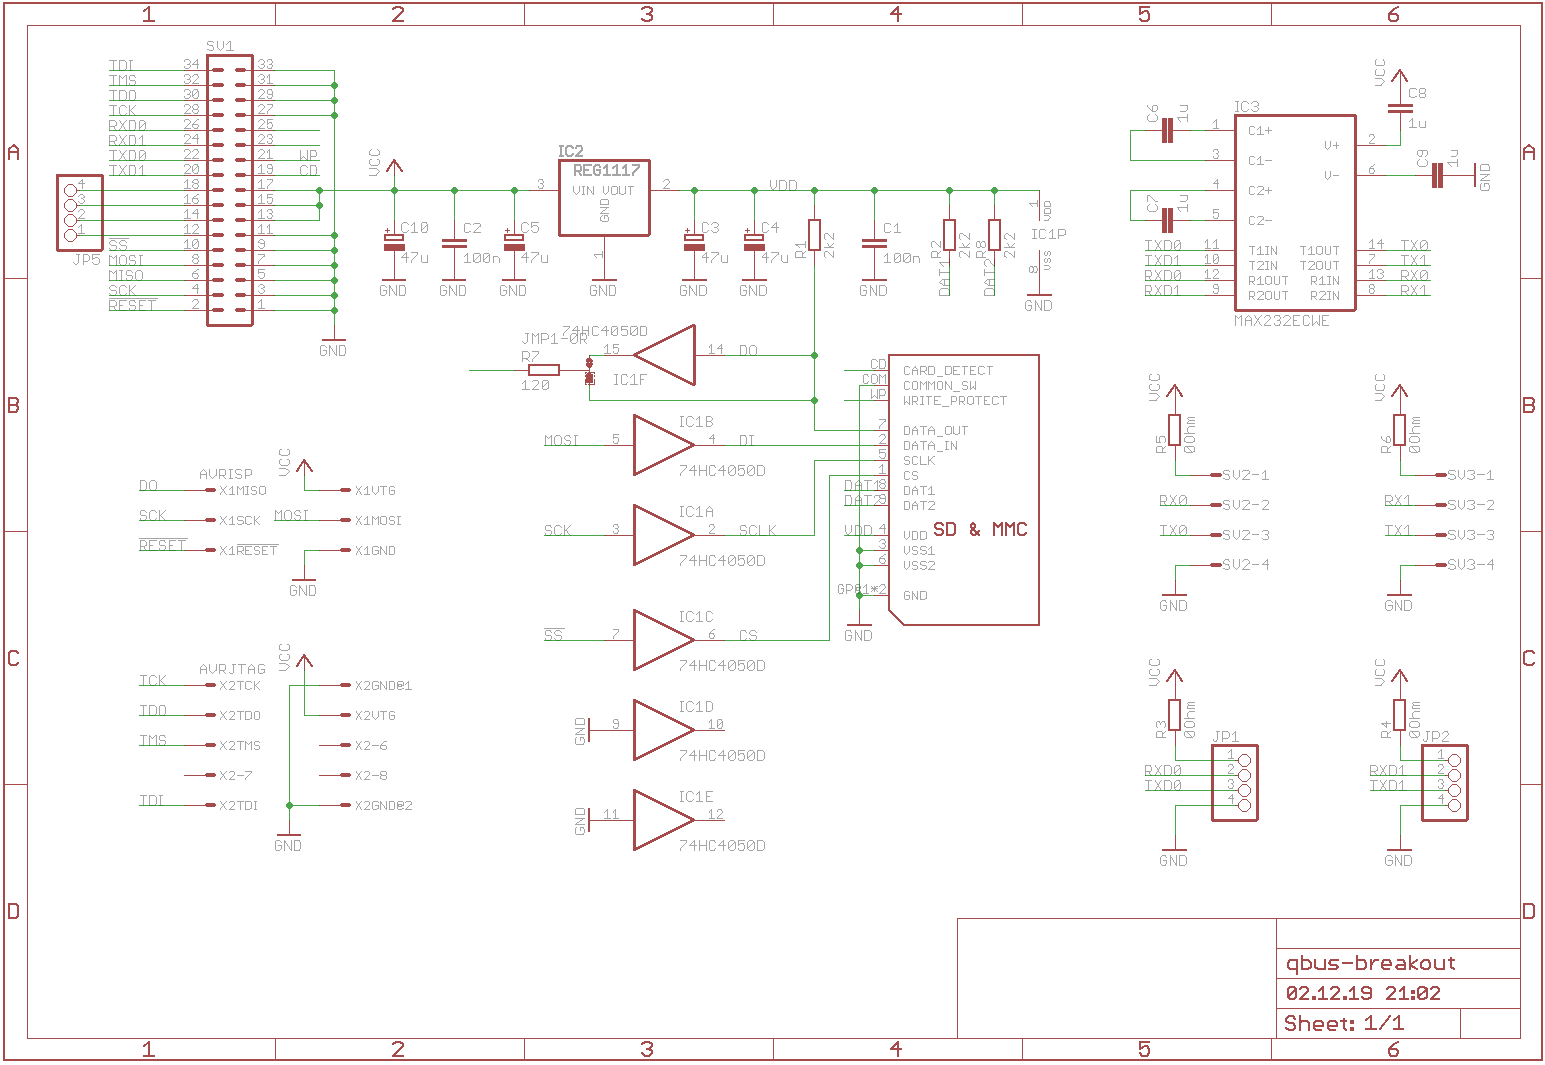 Schematic of the breakout board